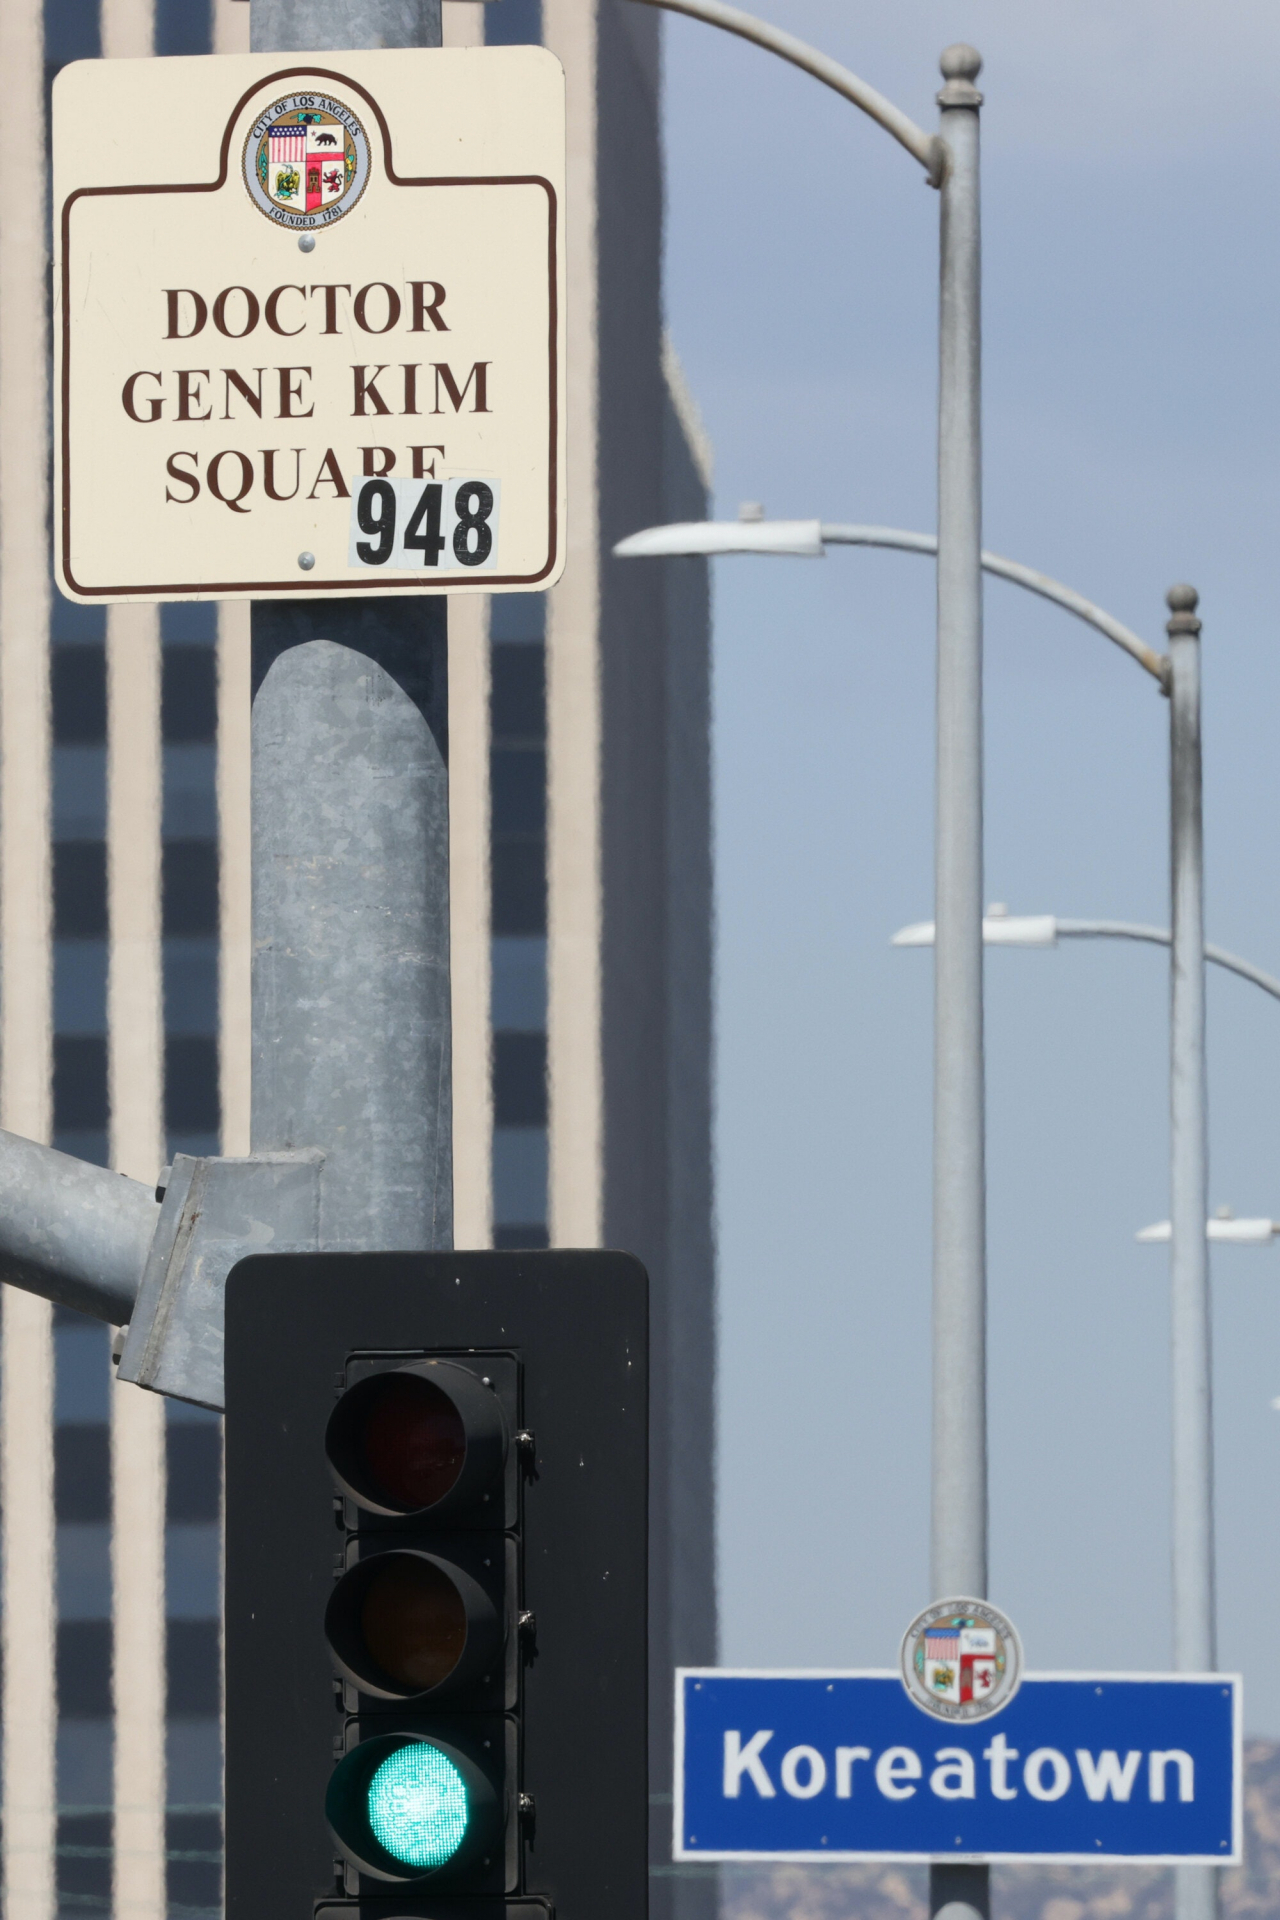 The intersection of Vermont Avenue & Olympic Boulevard in Los Angeles Koreatown was named Dr. Gene Kim Square in 2014. The Los Angeles Koreatown sign went up in 1982 after the area was officially designated as Koreatown on Nov. 8, 1981.Photo © Hyungwon Kang